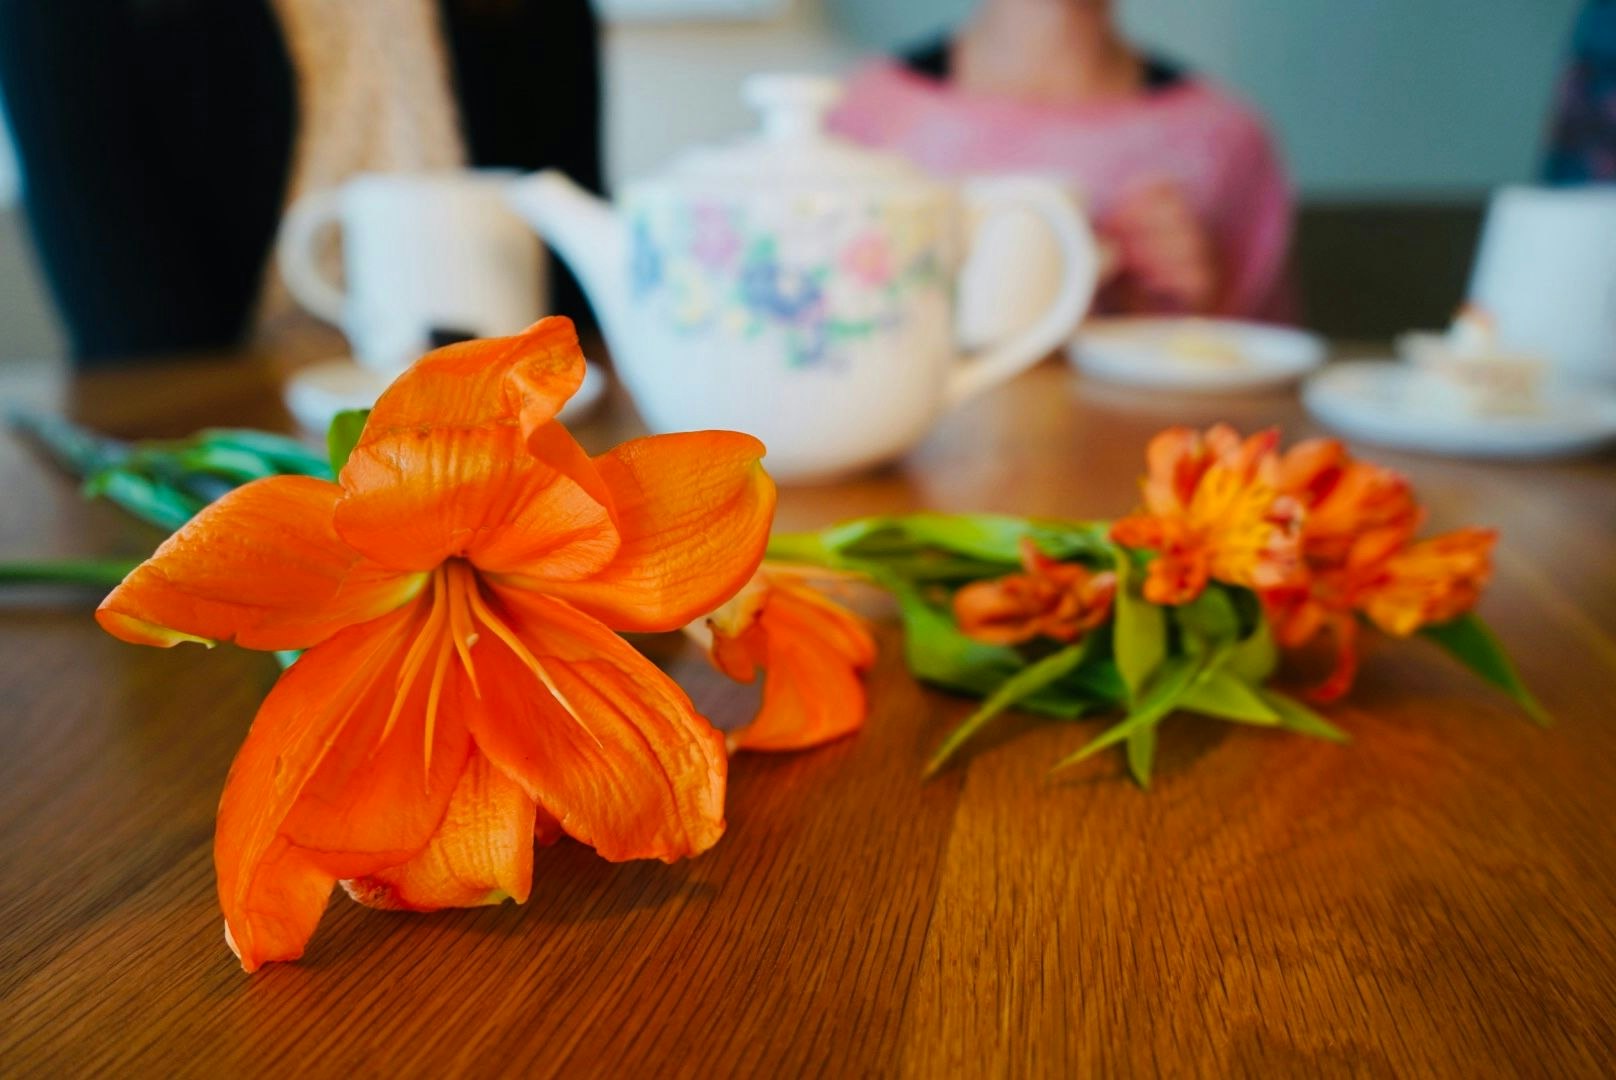 Flowers with tea kettle in background